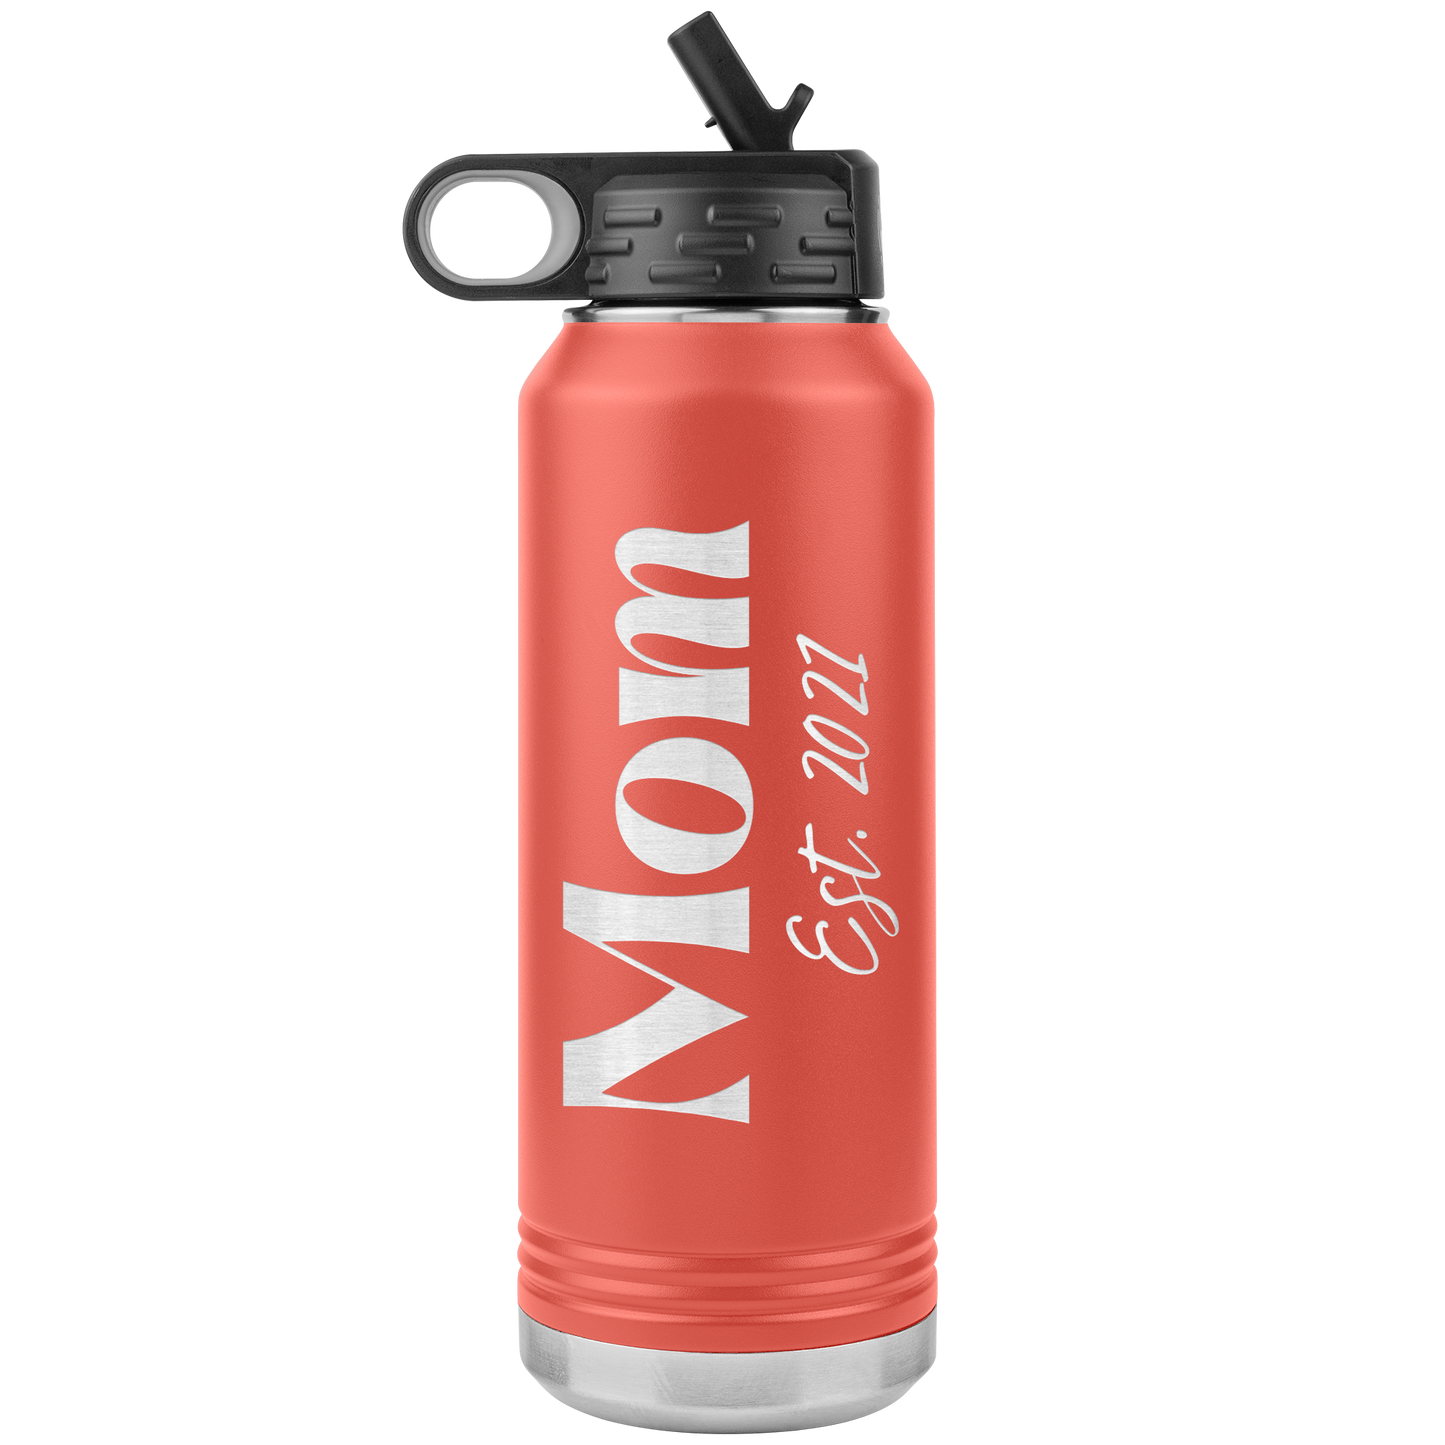 "Mom Est. 2021" 32 oz. Insulated Stainless Steel Water Bottle with Flip Top Lid & Built-in Straw